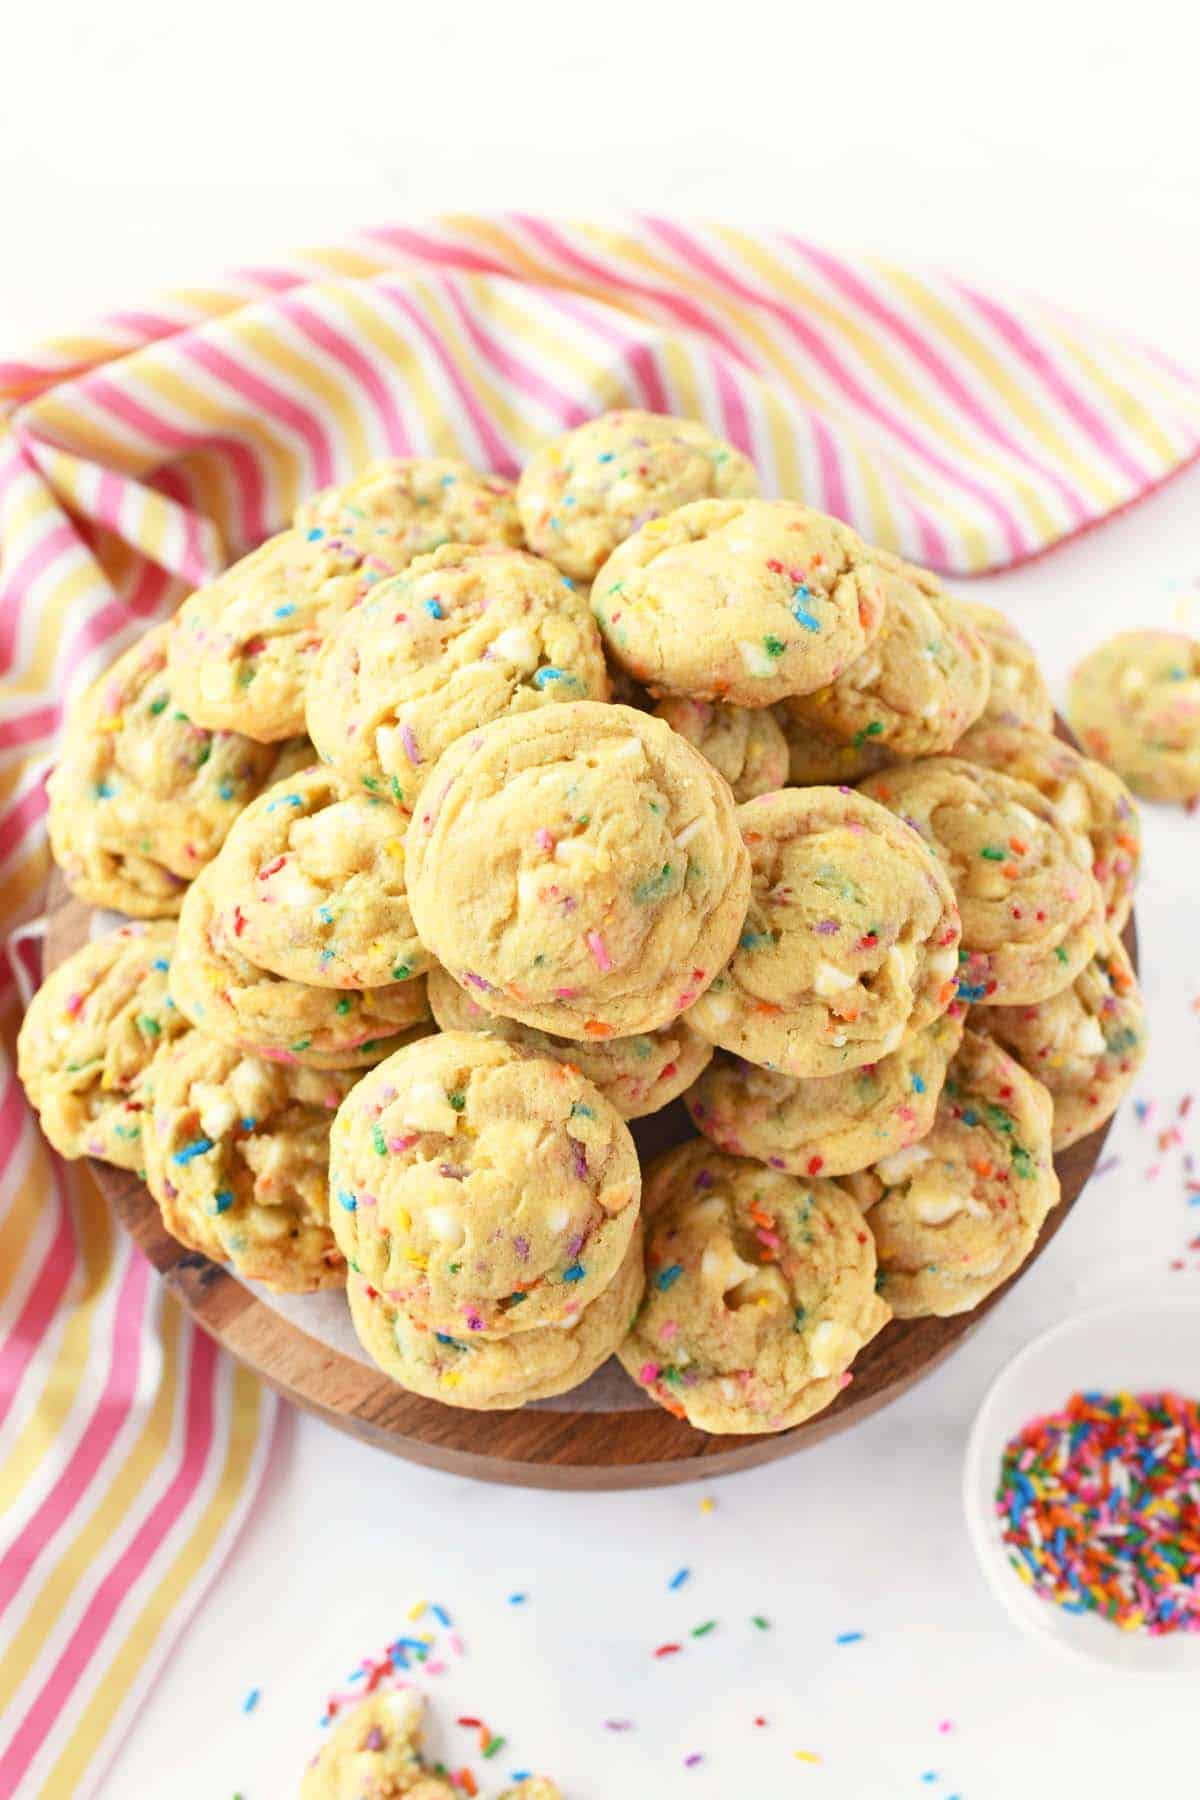 Sprinkle cookies on a tray with a pink and yellow napkins.